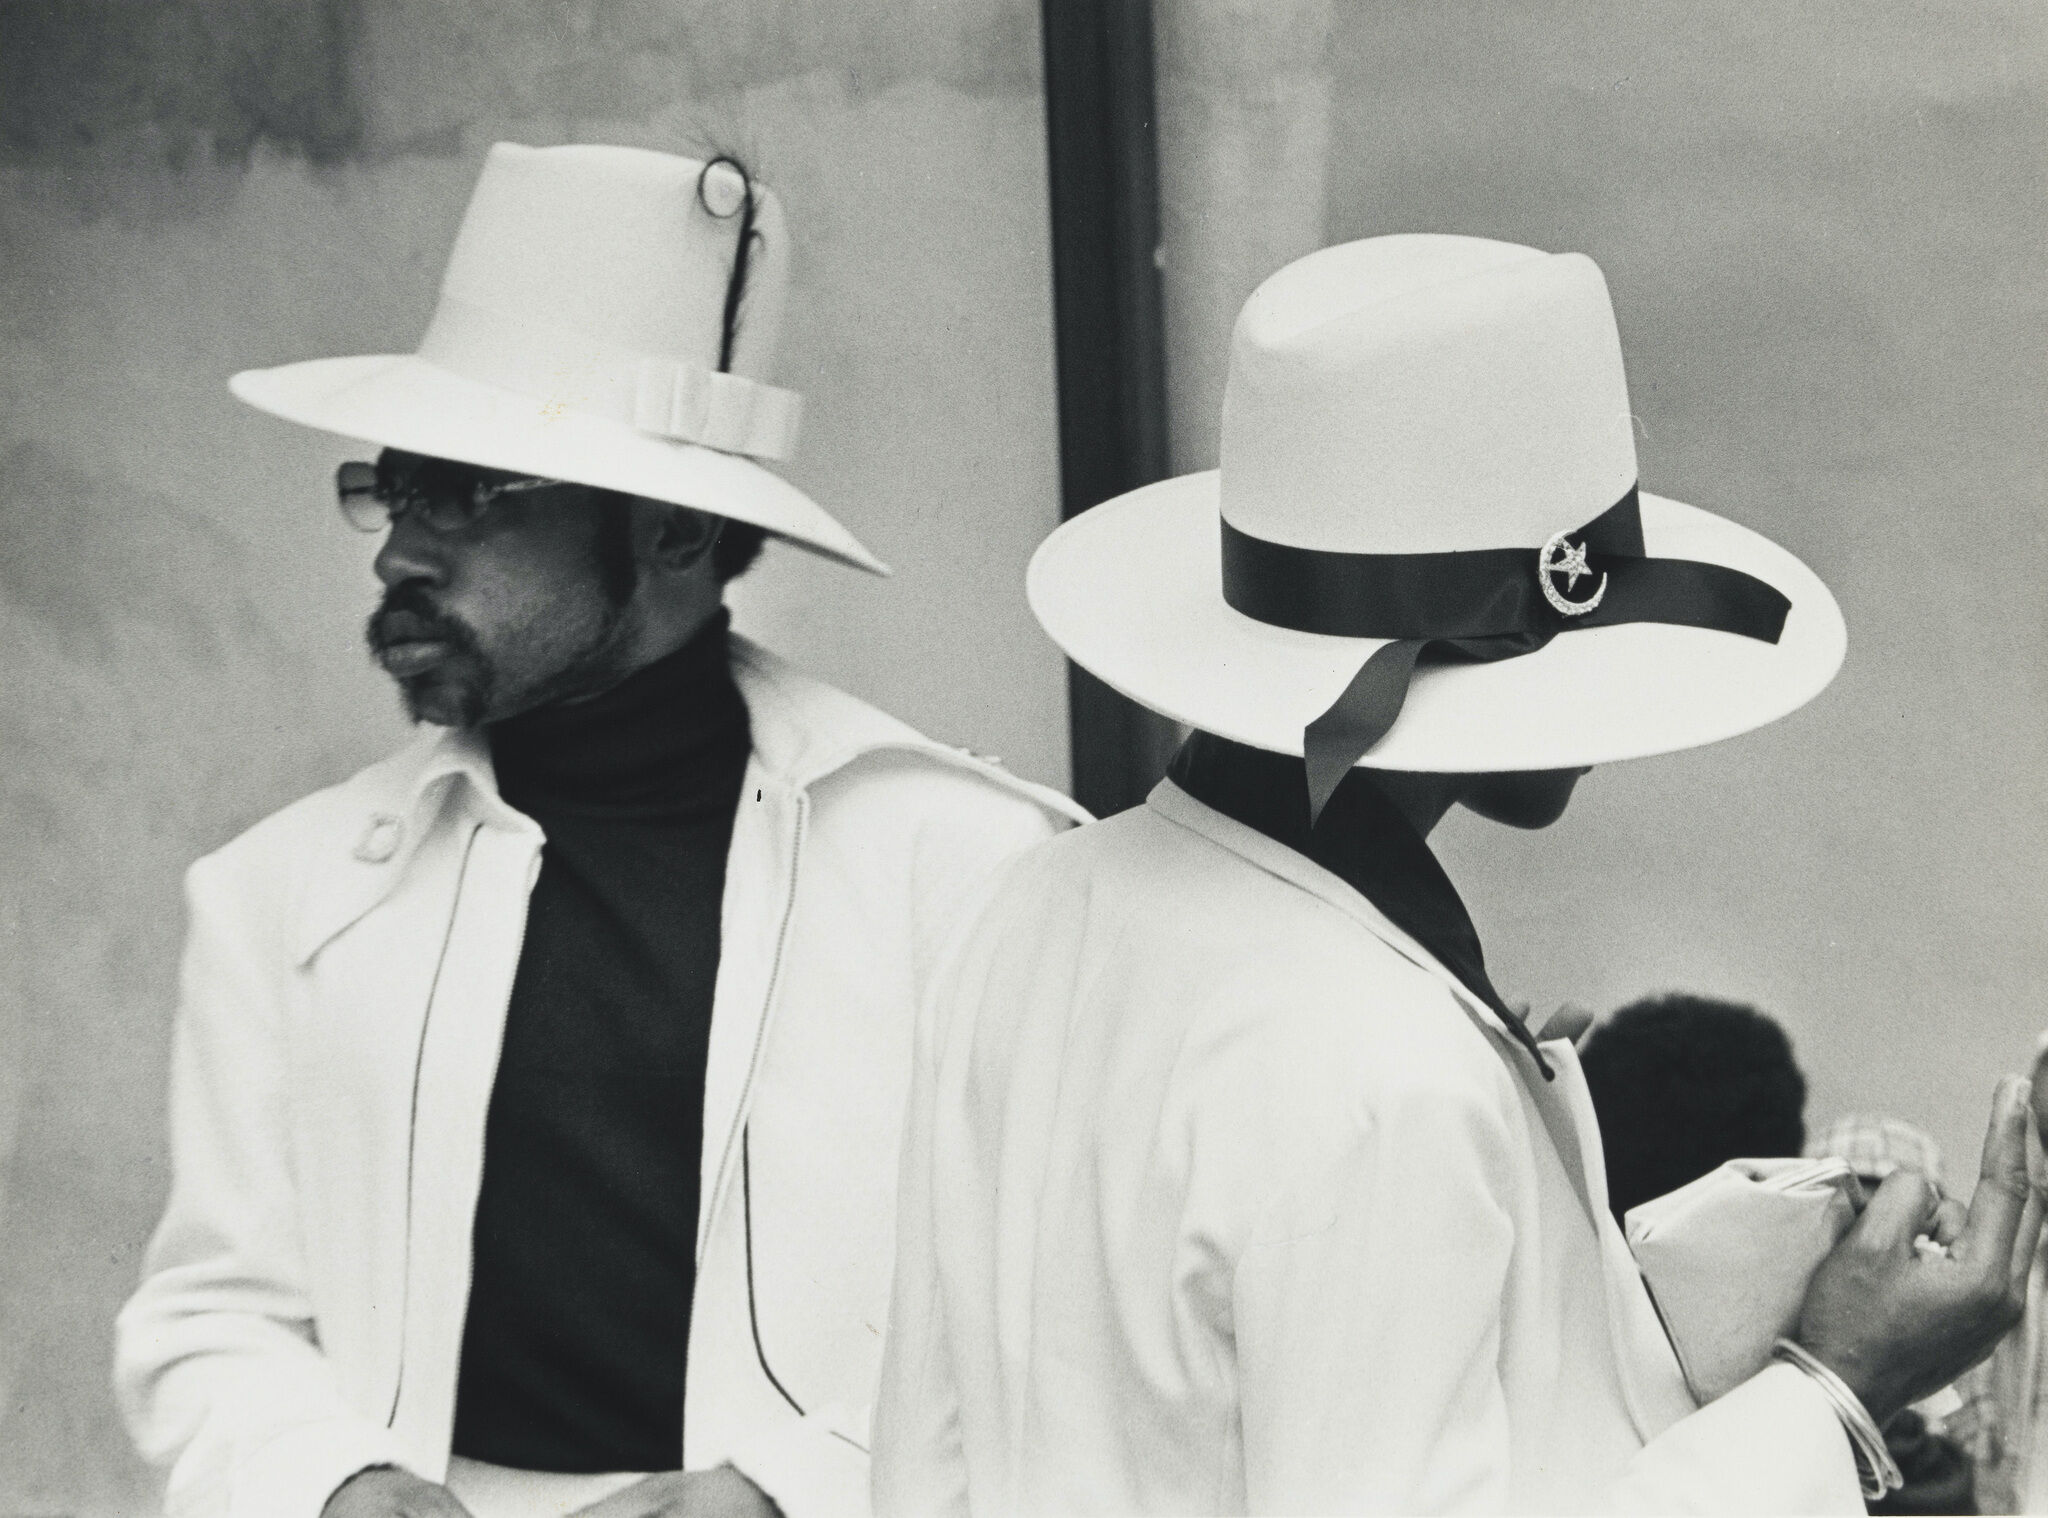 A two people looking opposite ways in white hats.